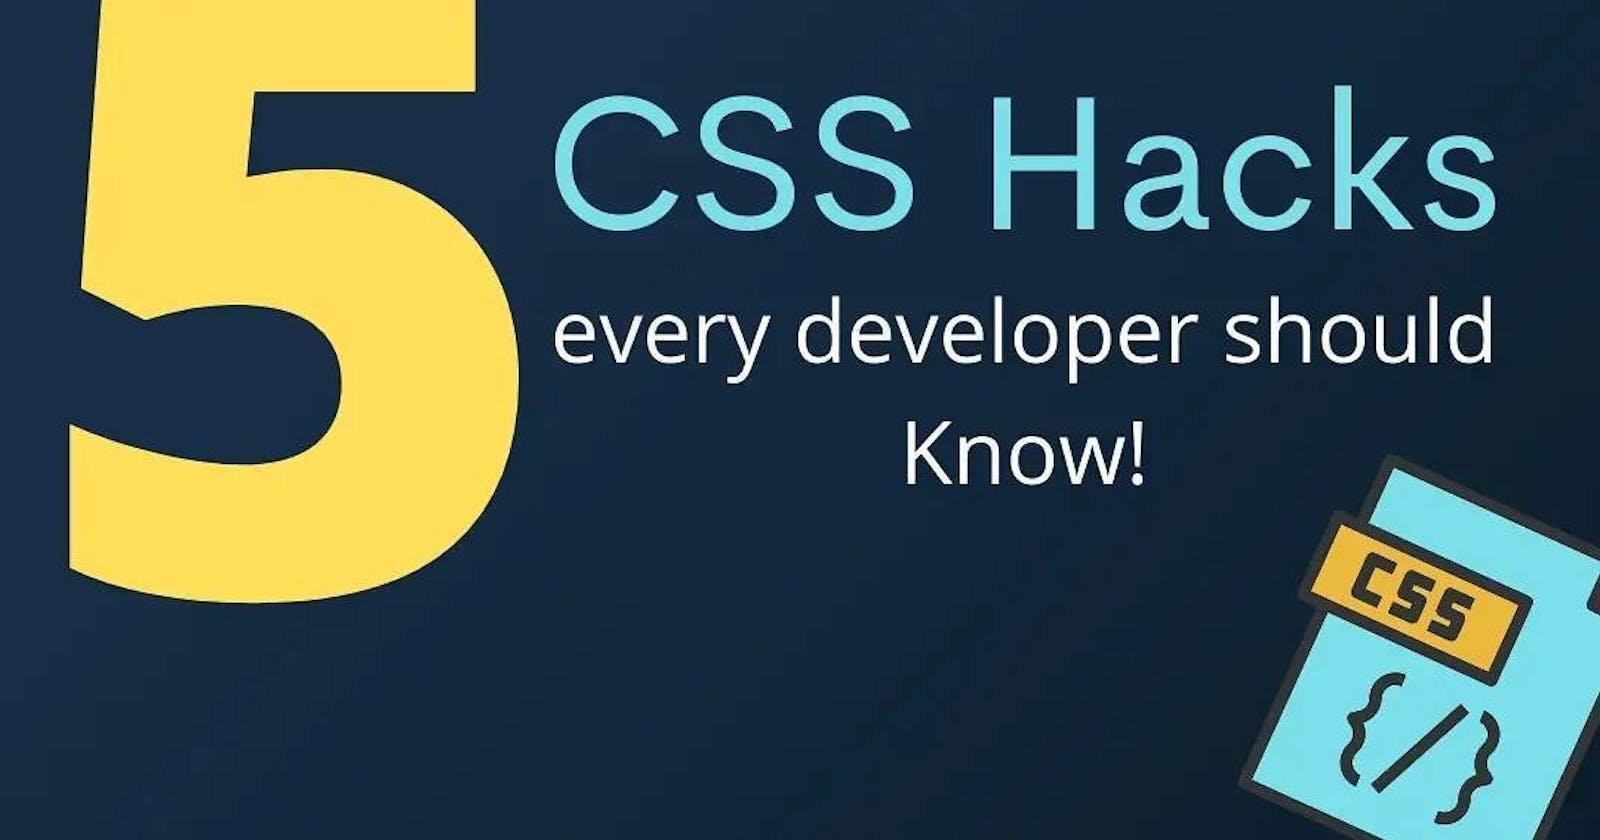 5 Css Hacks Every Developer Should Know